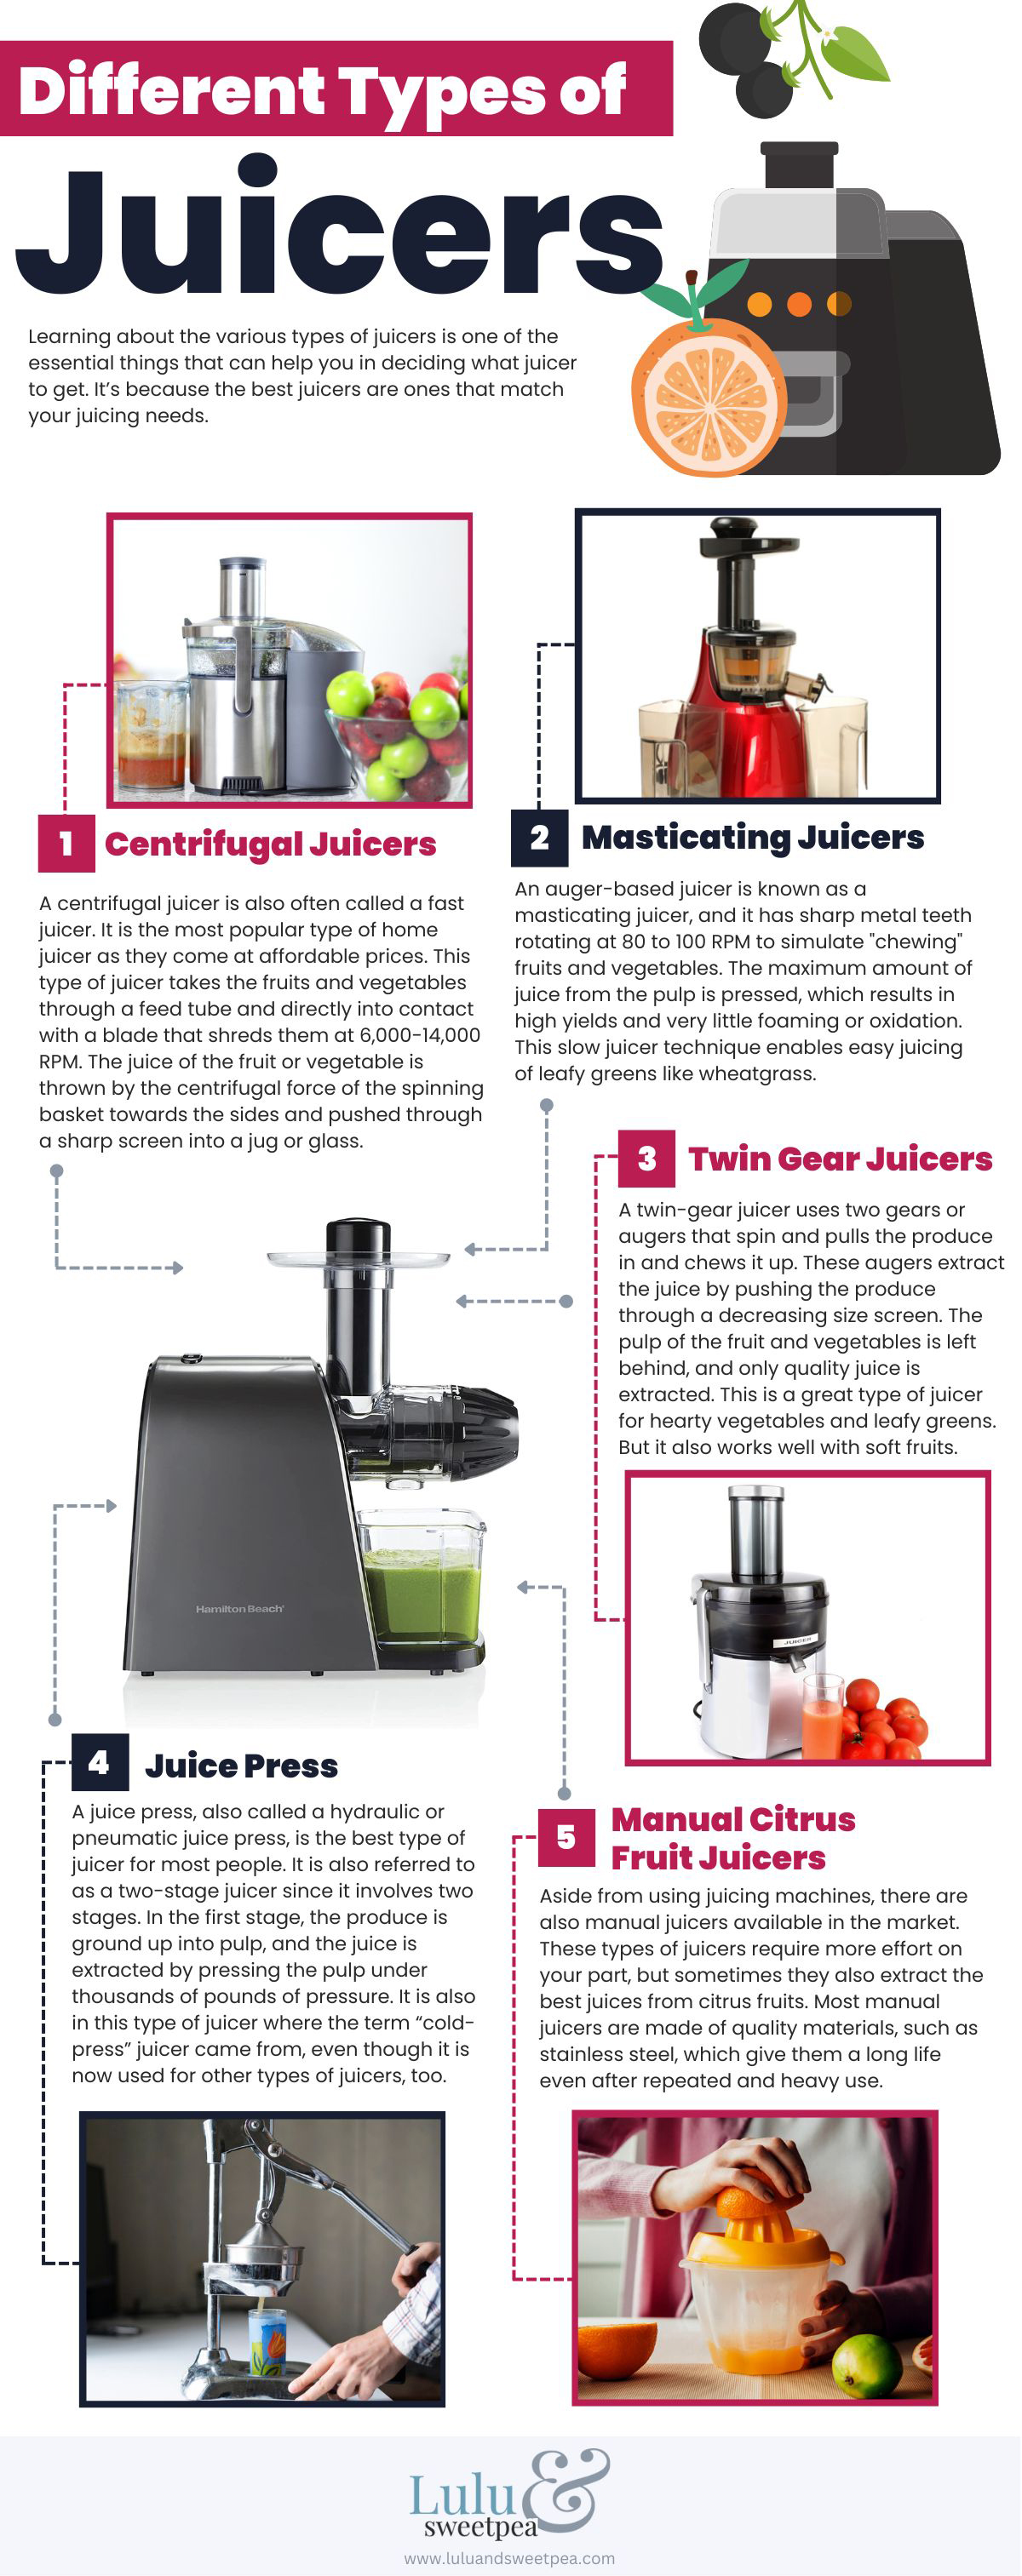 Different-Types-of-Juicers